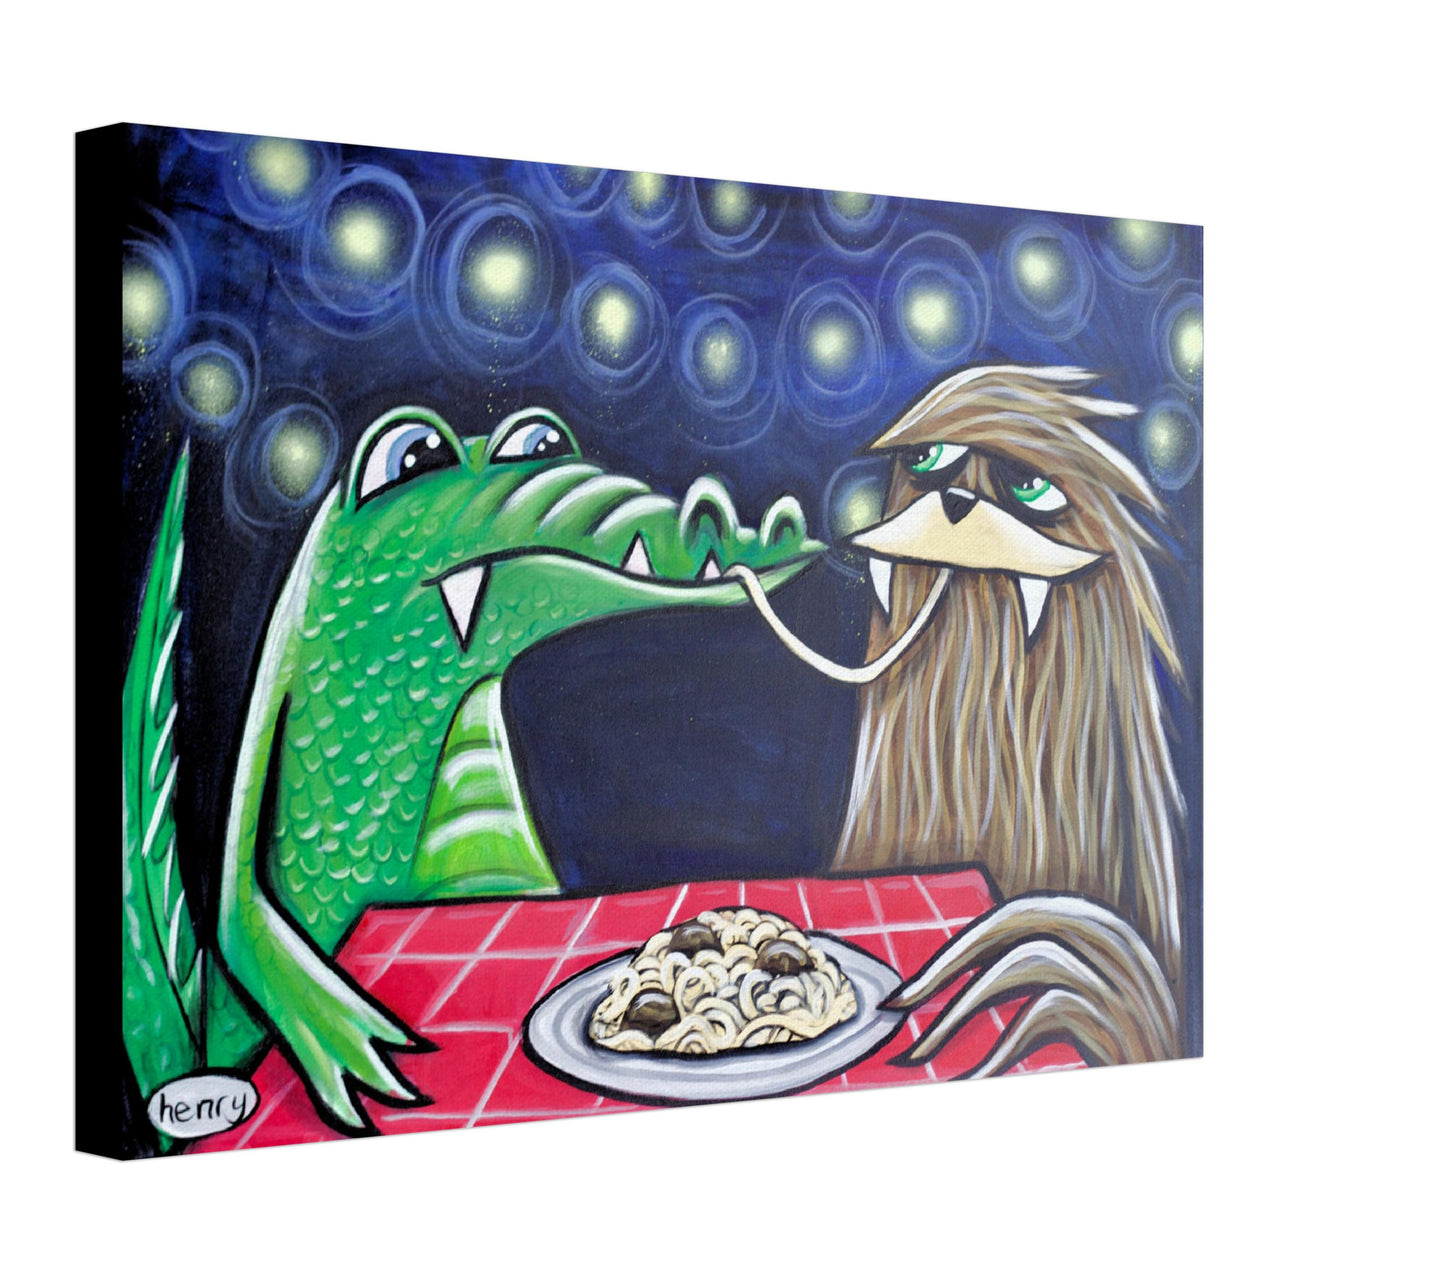 Sasquatch and the Alligator Canvas Giclee Print Featuring Original Art by Seattle Mural Artist Ryan Henry Ward